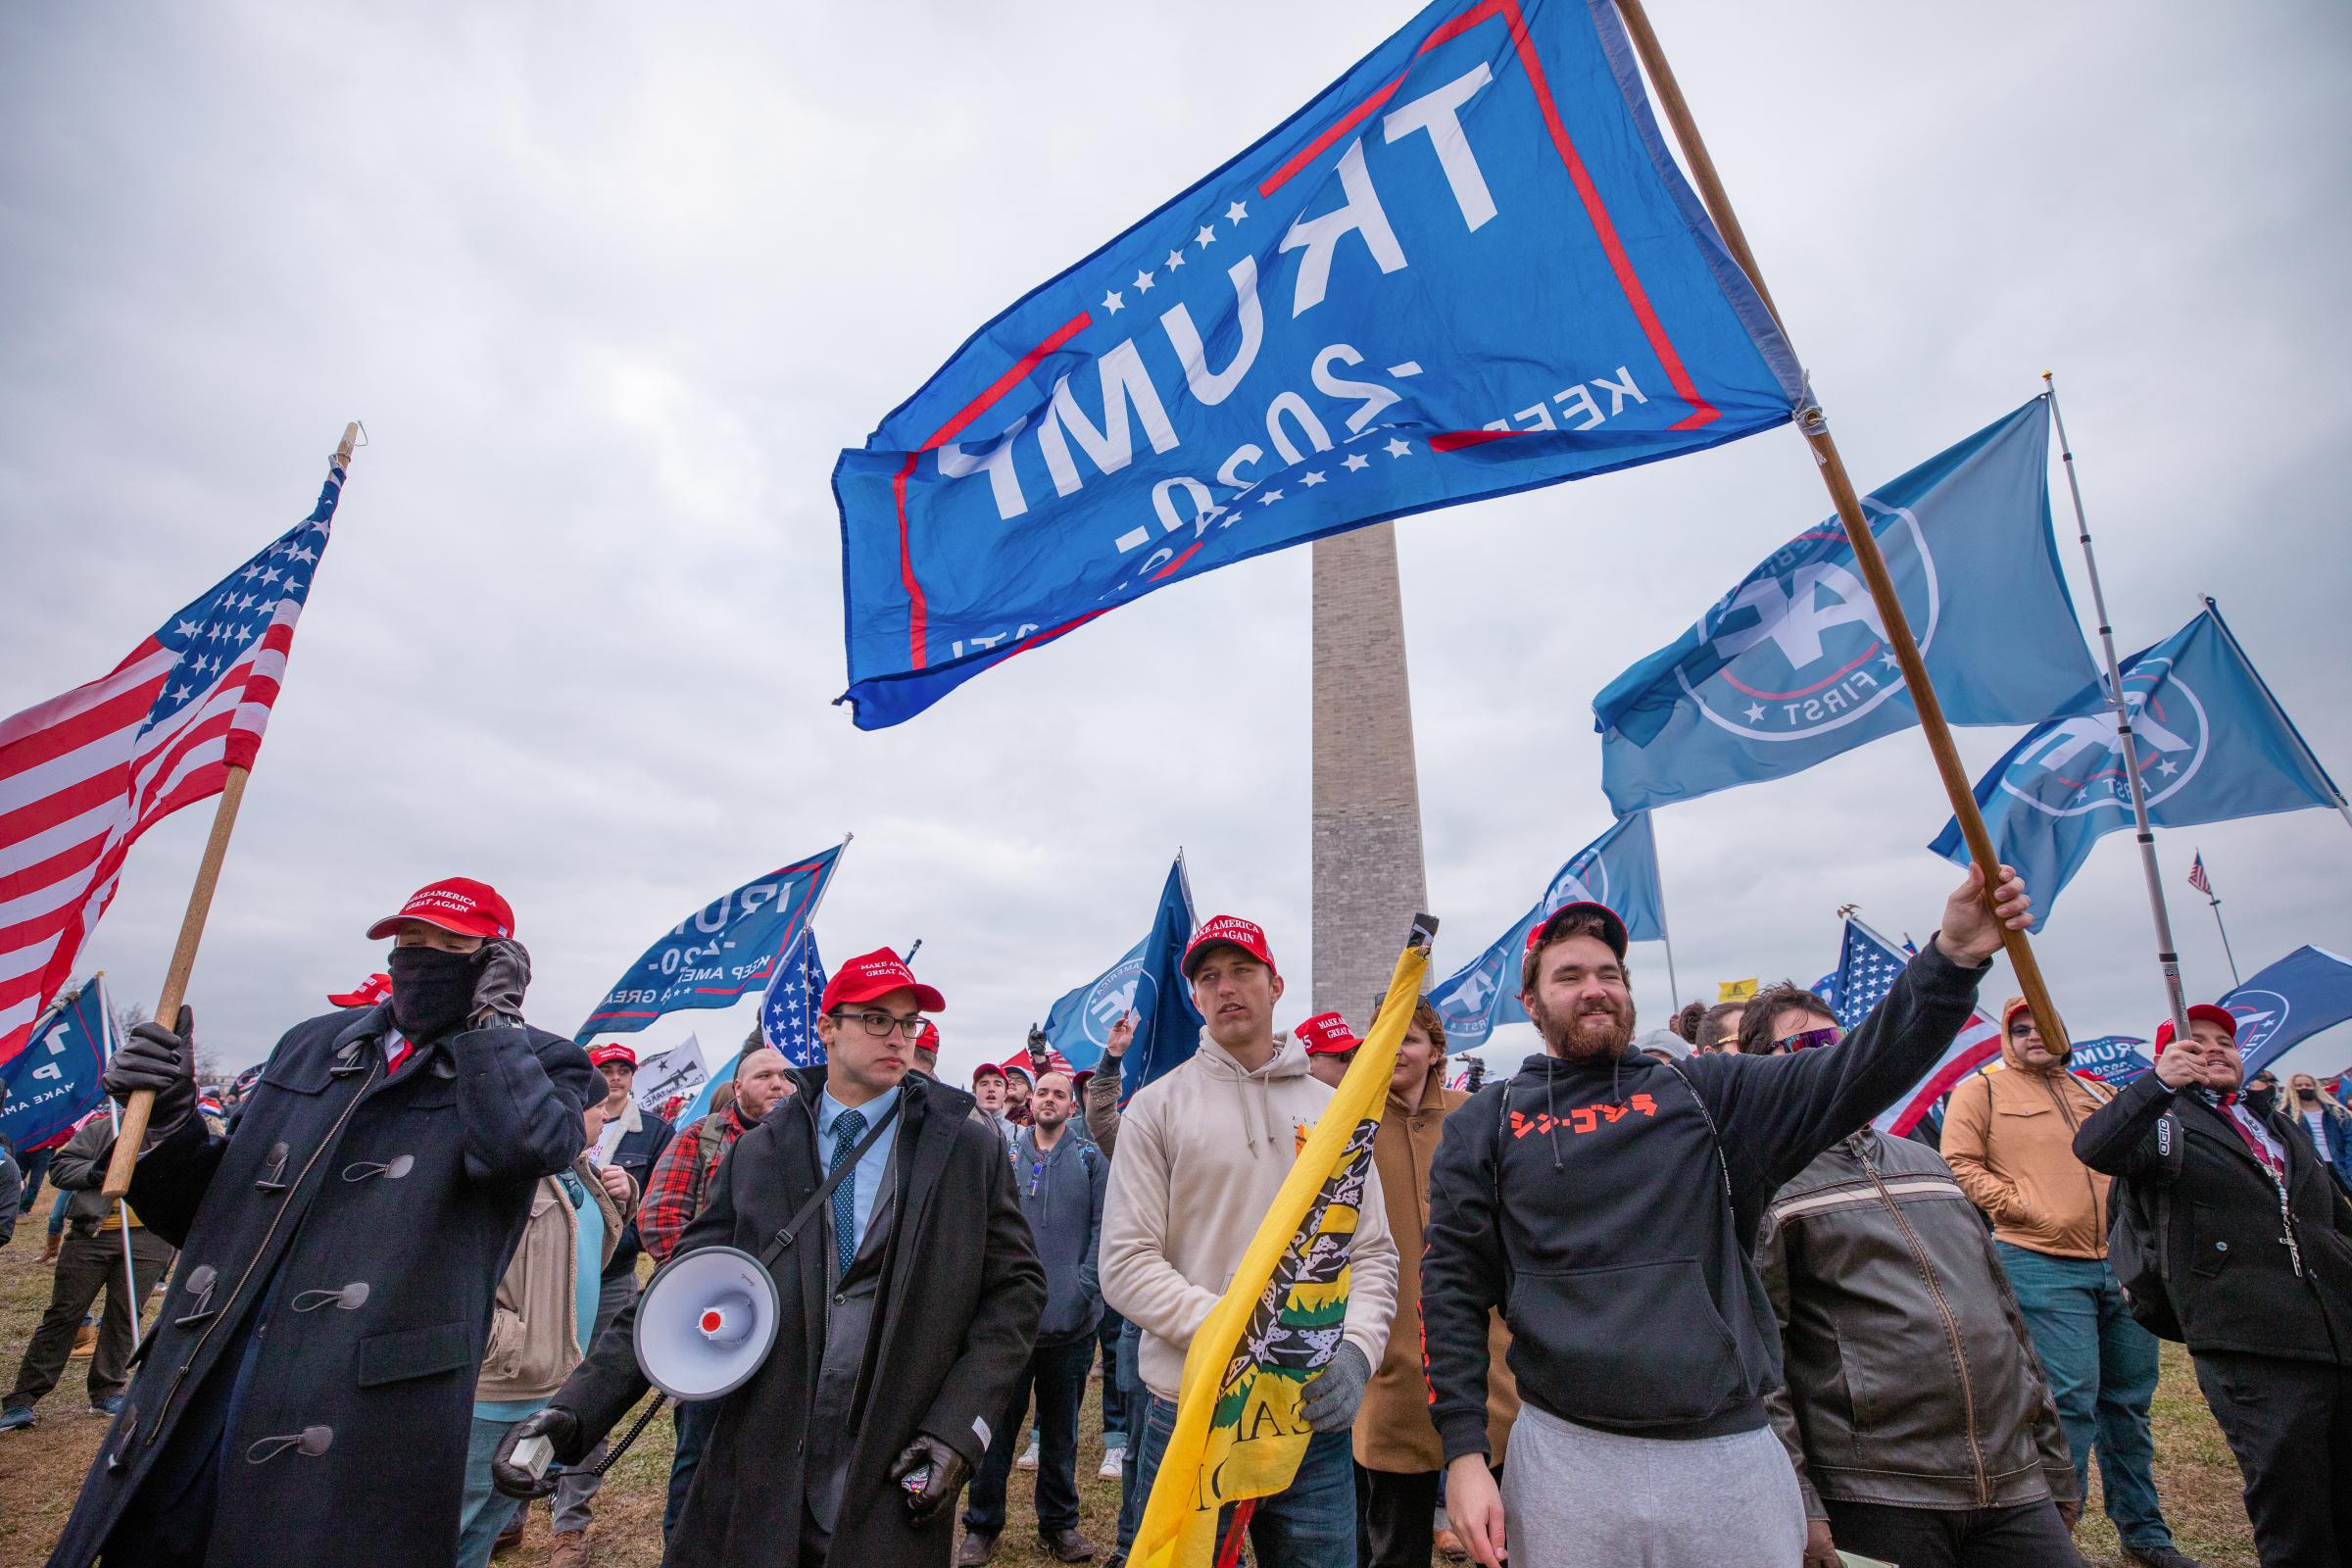 Capitol Hill Insurrection & Aftermath - Thousands of Trump's supporters protesting at...